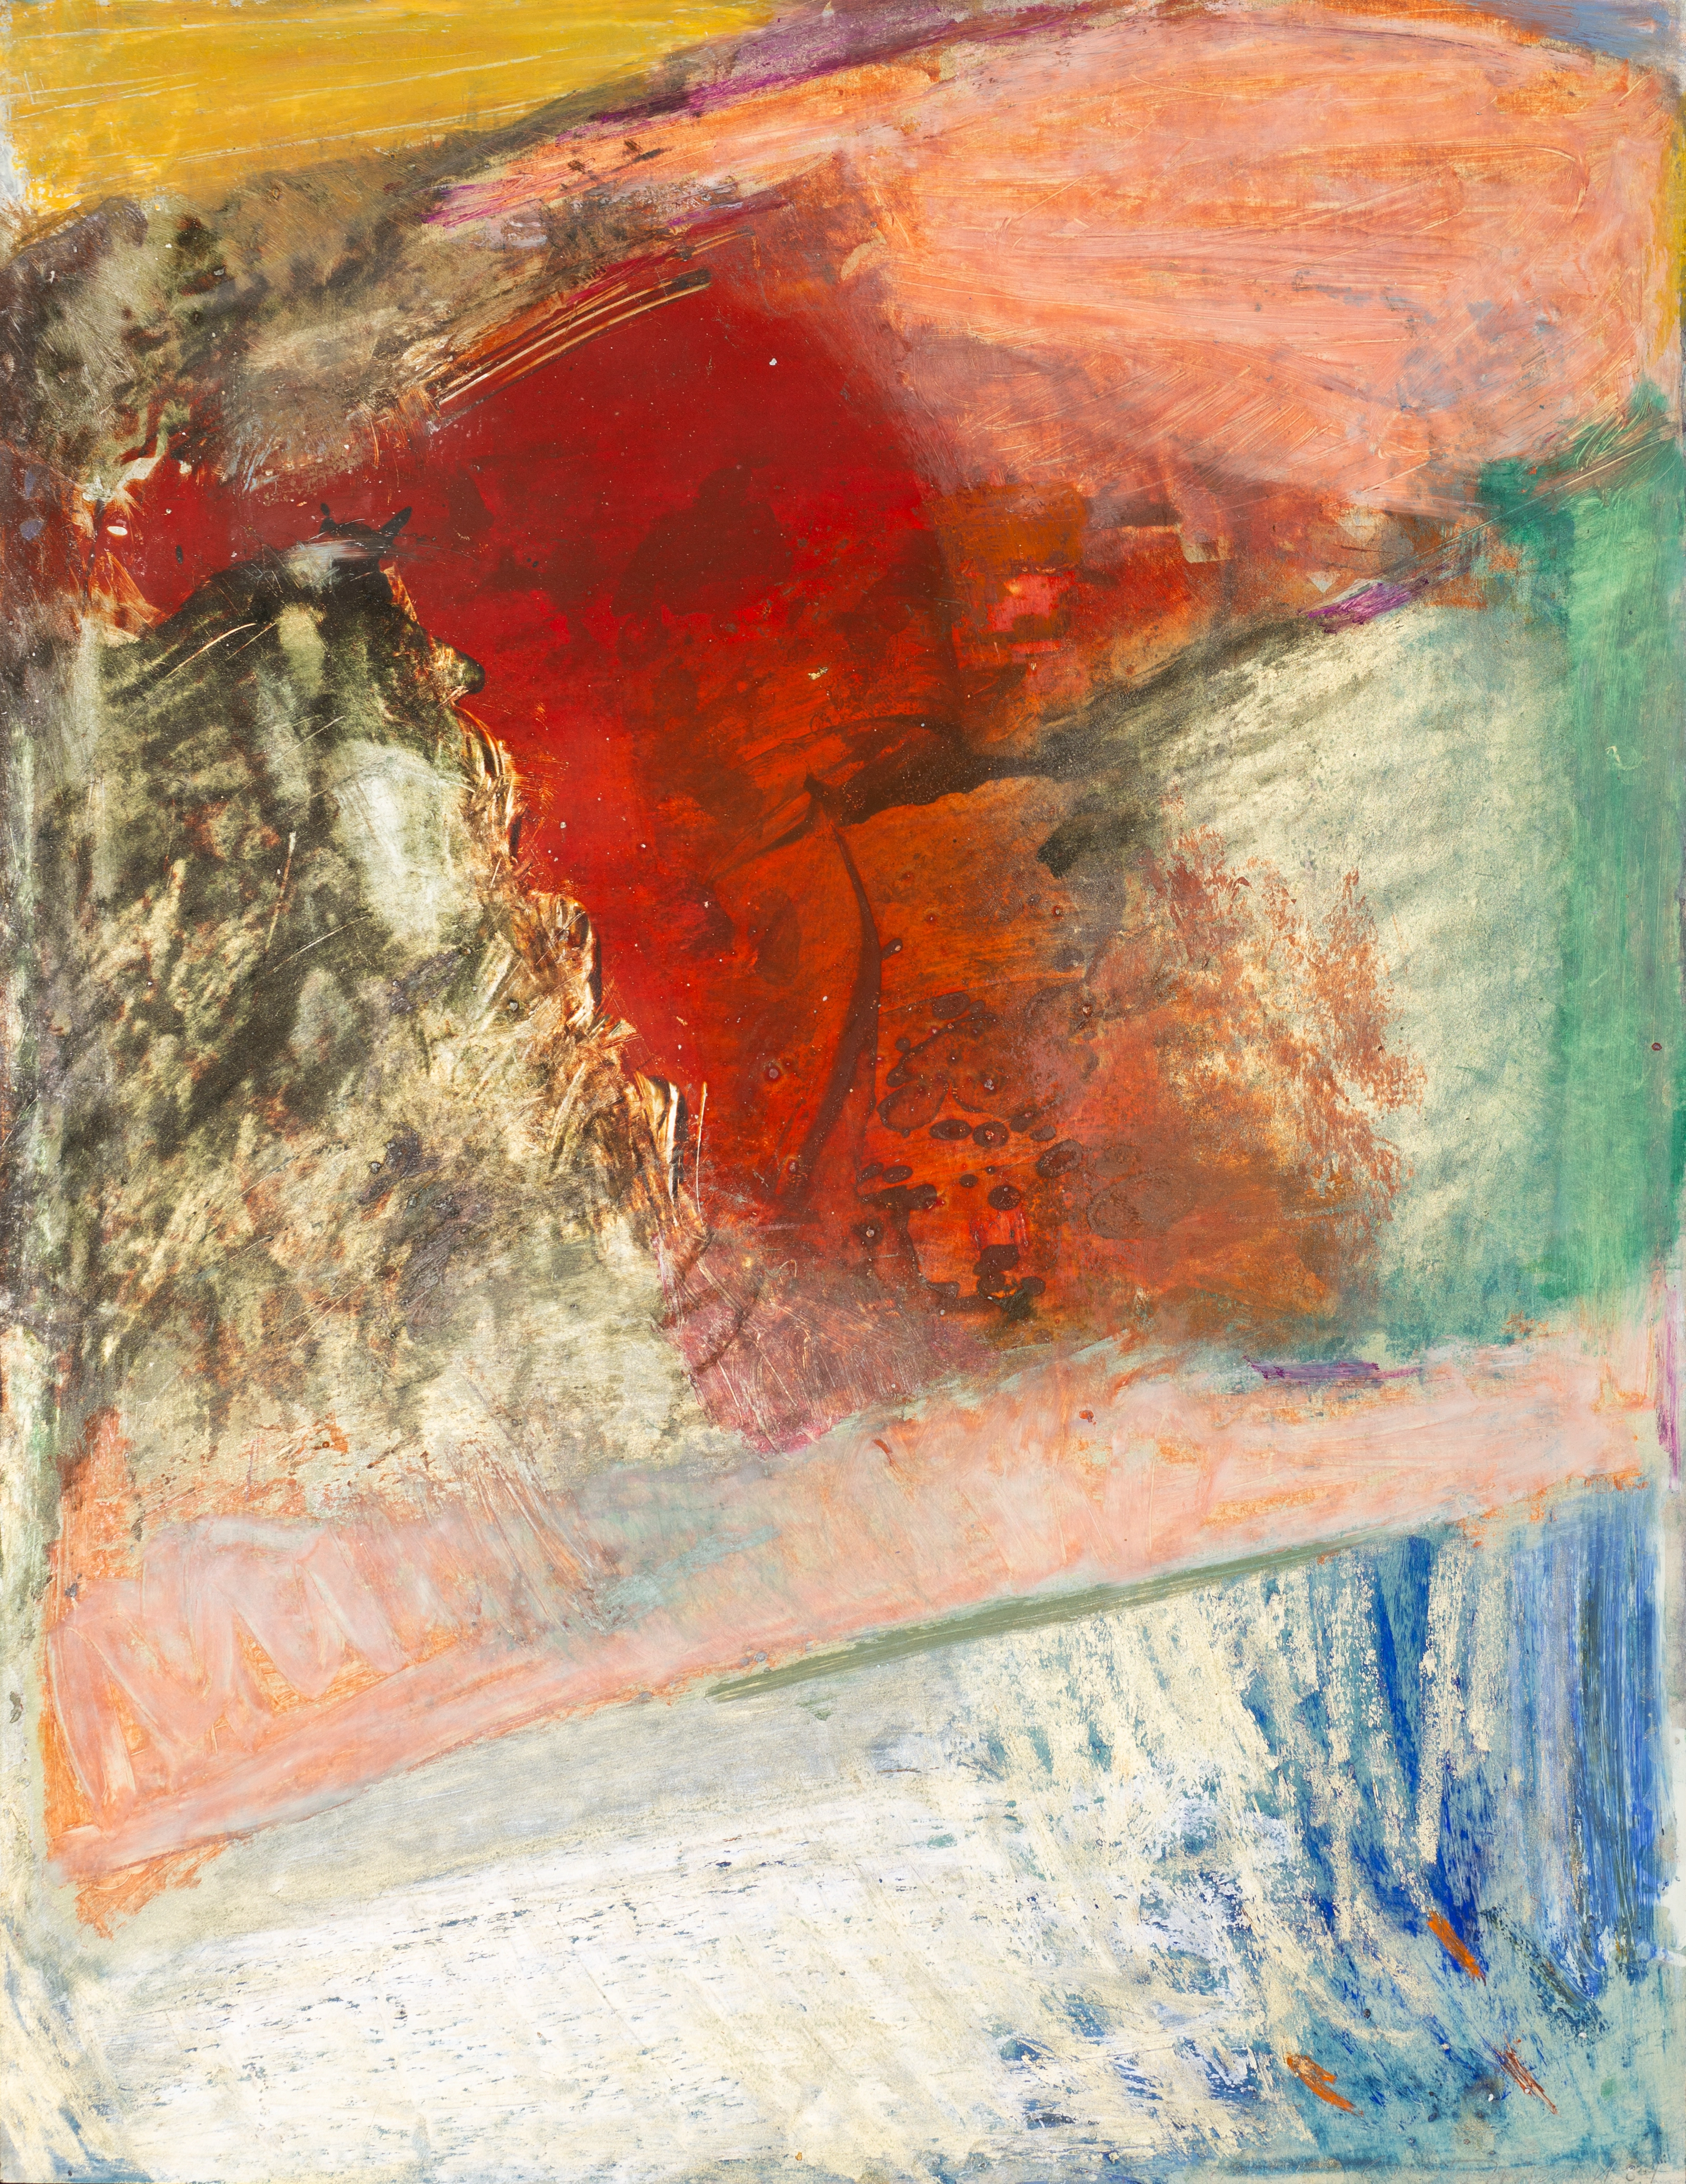 Abstract oil on paper work with white layered over blue, peach, brown, and green colors. A red translucent form is in the center of the canvas.